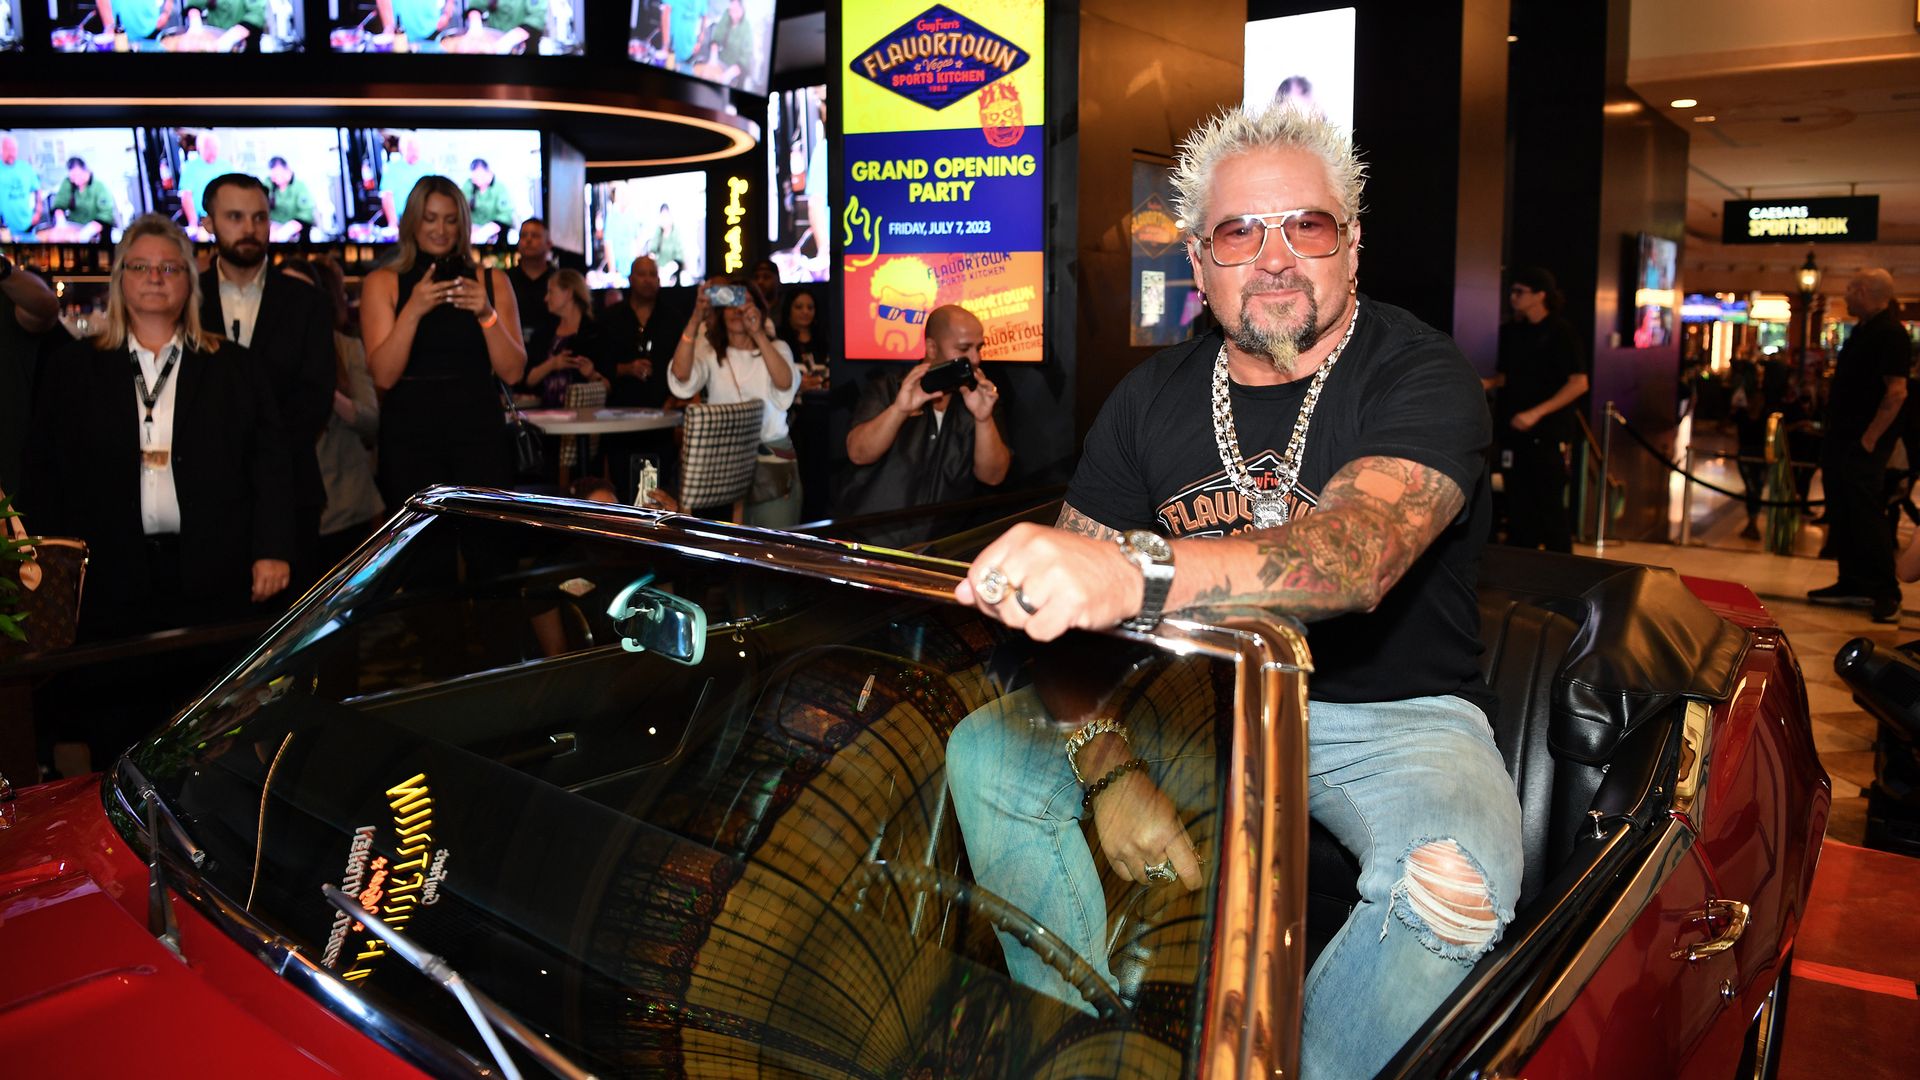 Guy Fieri poses in the iconic 1968 Chevrolet Camaro from his TV series "Diners, Drive-Ins and Dives." Photo: Denise Truscello/Getty Images for Caesars Entertainment